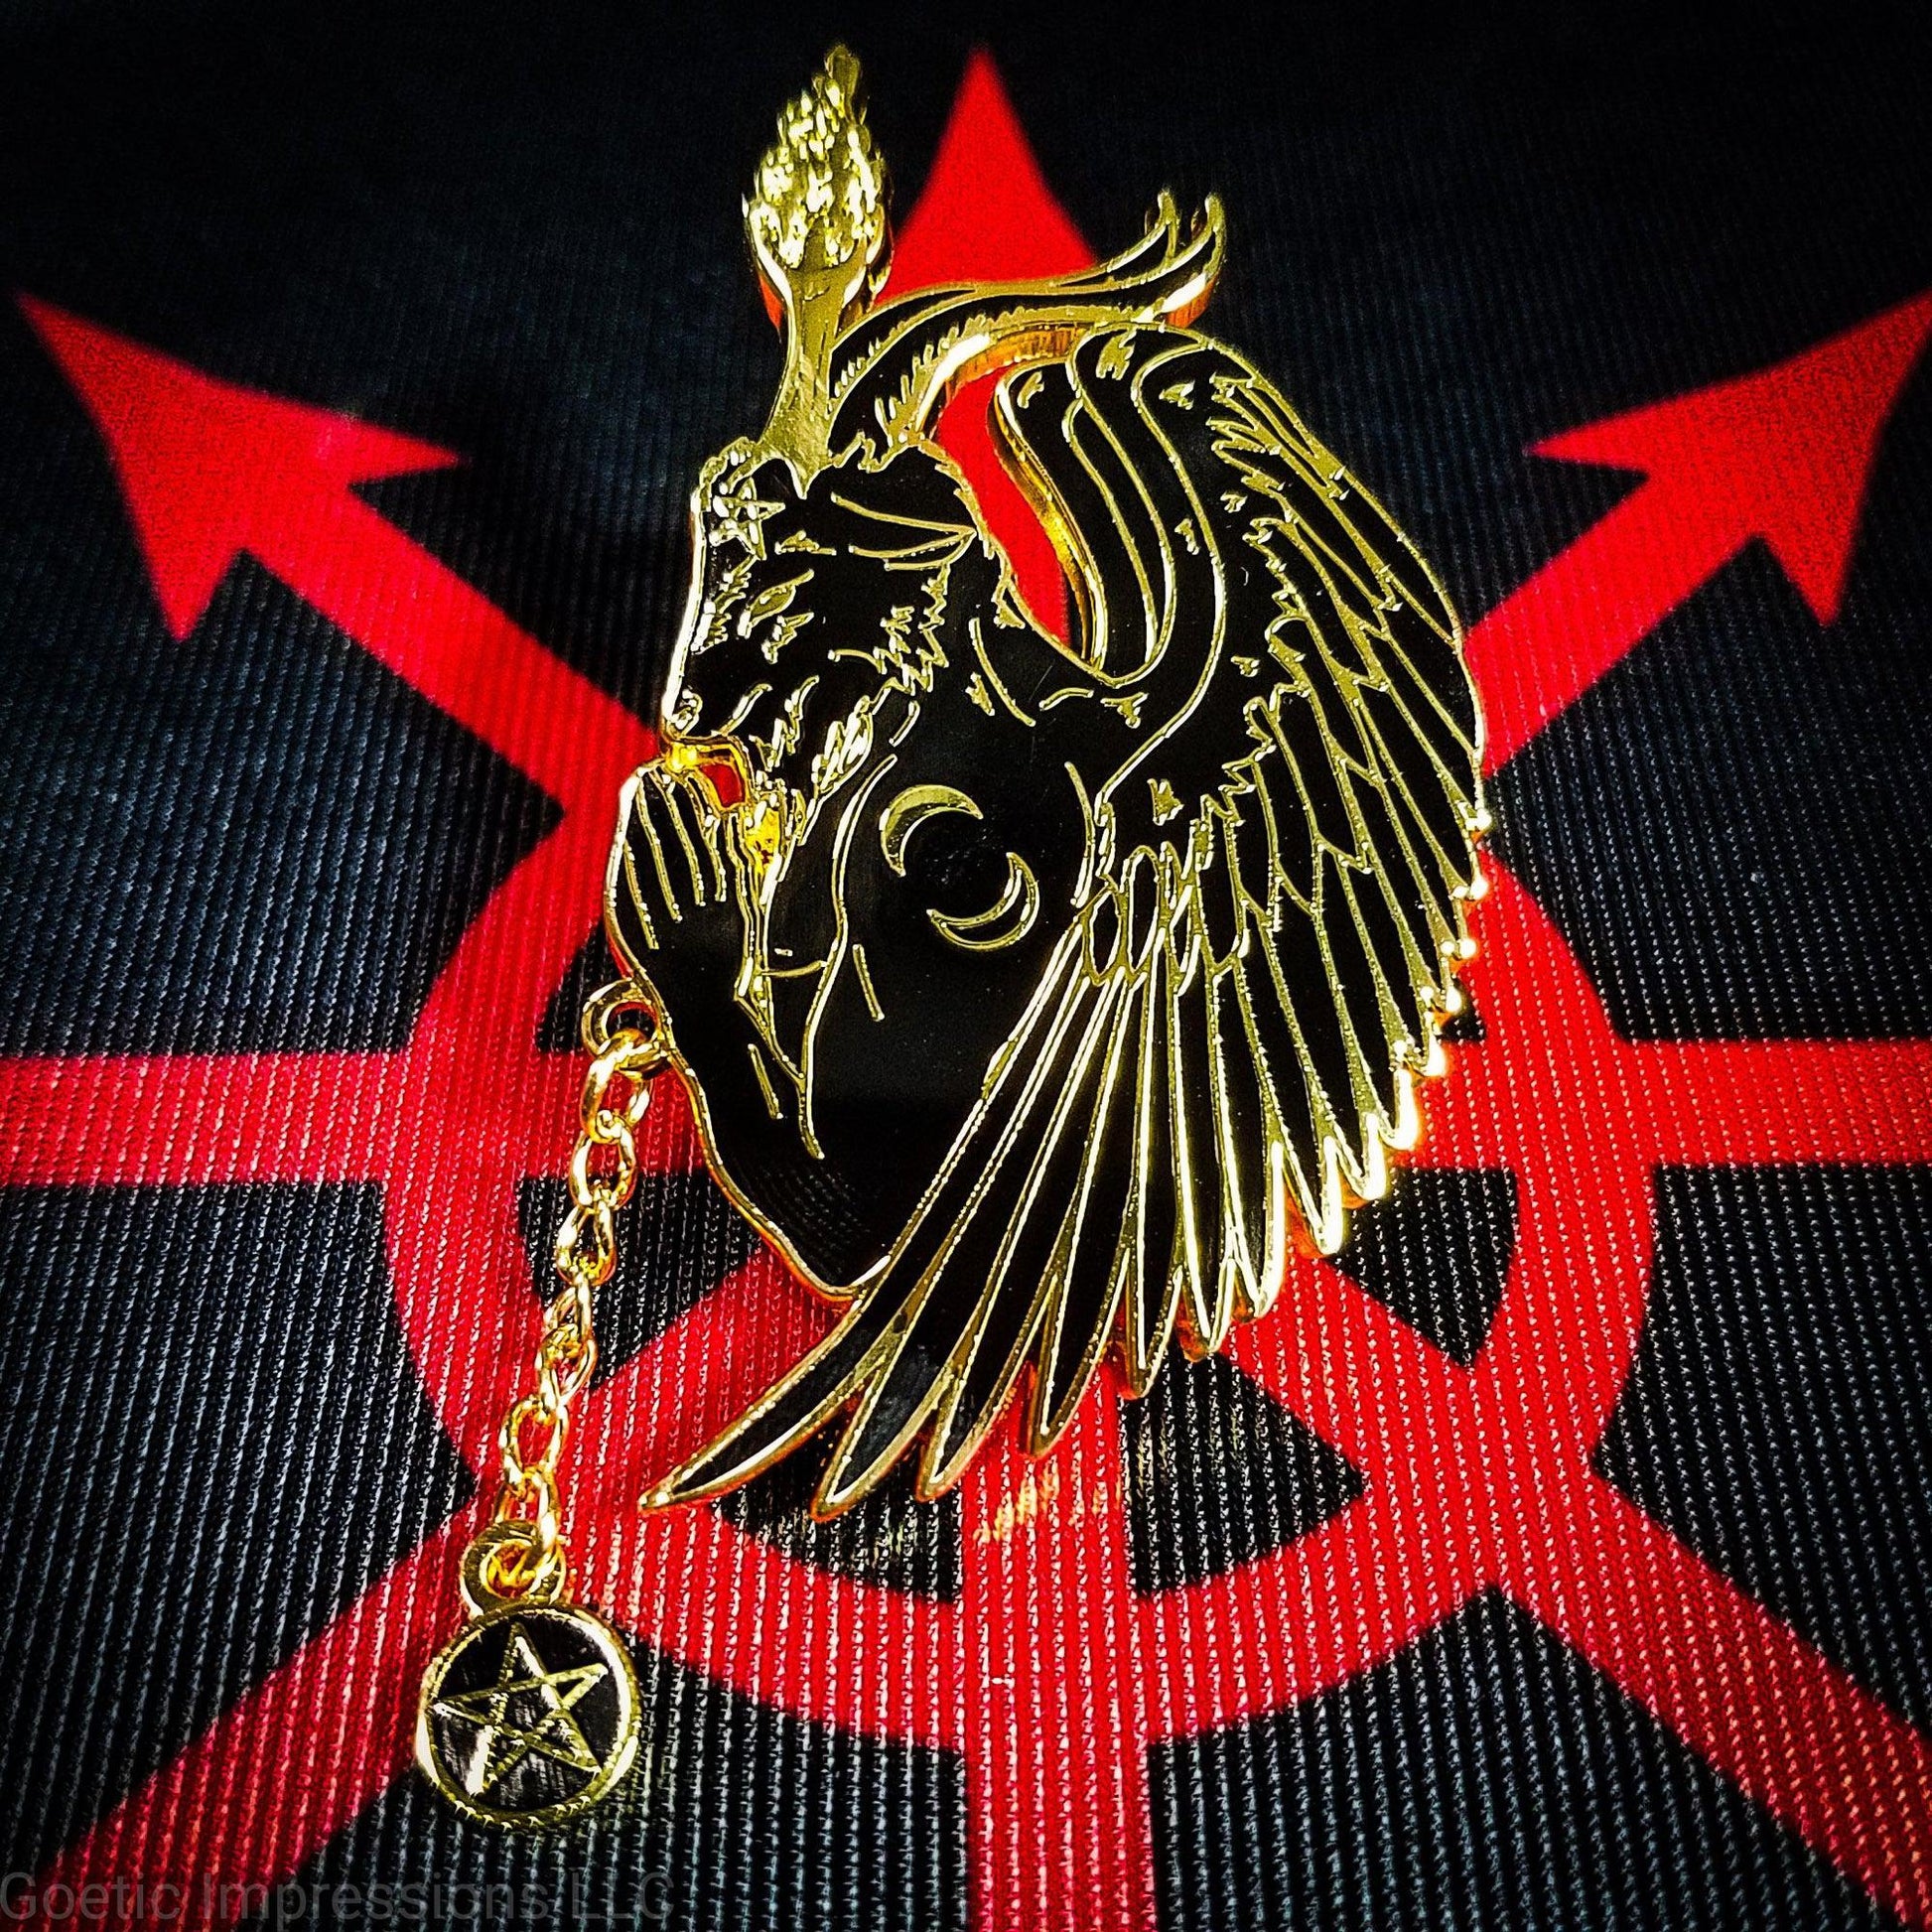 A black and gold hard enamel pin featuring Baphomet in a side profile praying pose. There is a pentacle chain rosary in Baphomet's hands. The pin is on a black and red altar cloth with the chaos star in the center. 